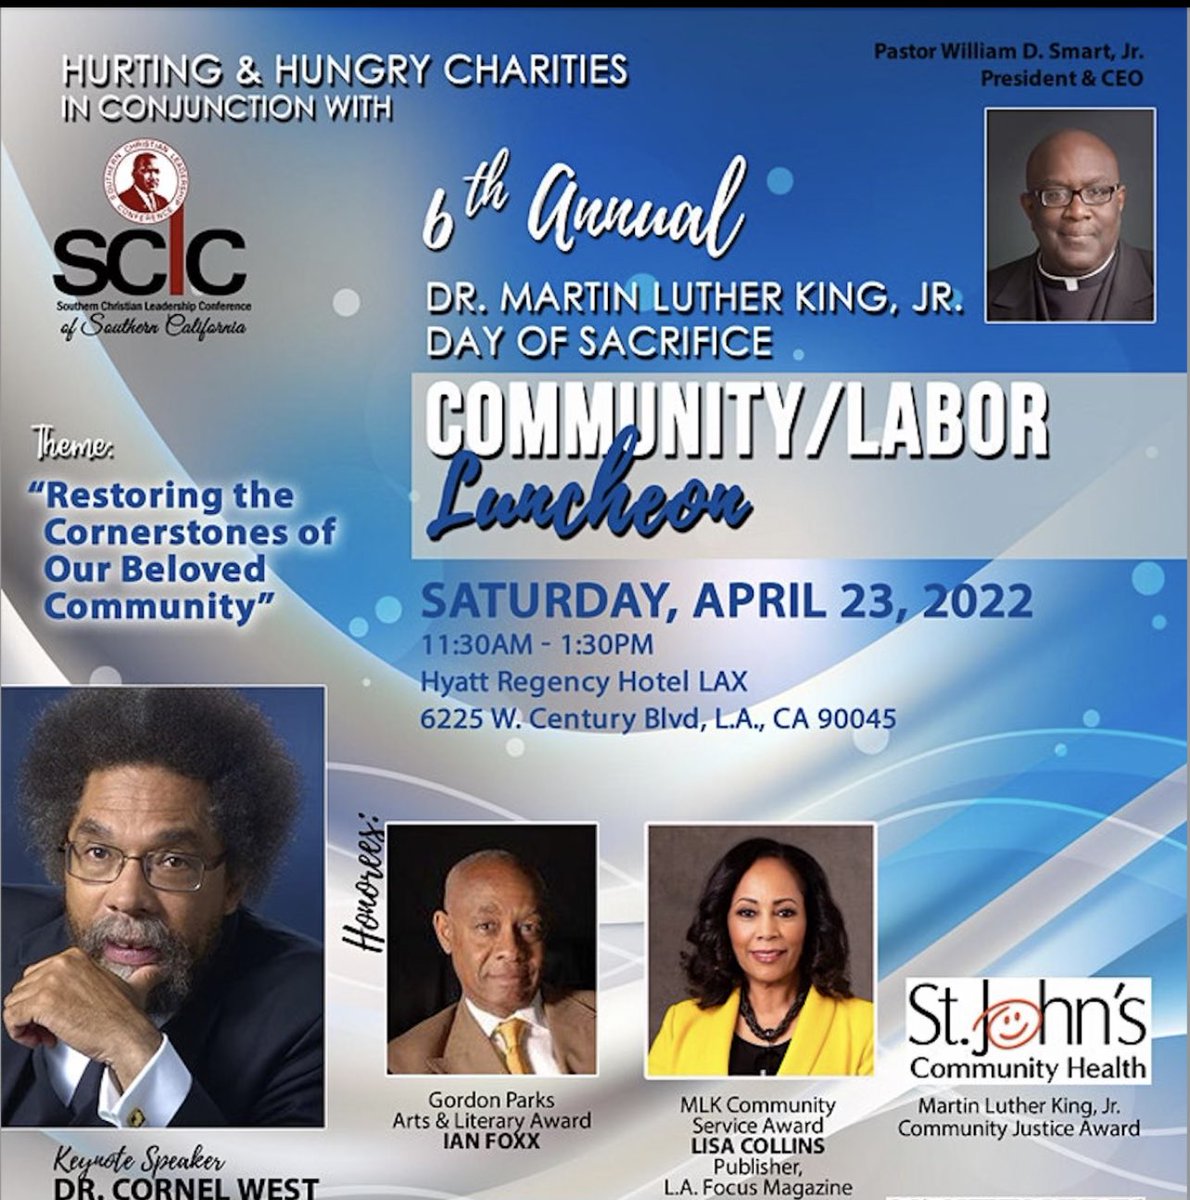 I am honored to deliver the keynote this Saturday for the SCLC of Southern California #MLKDayOfSacrifice Community & Labor Luncheon!